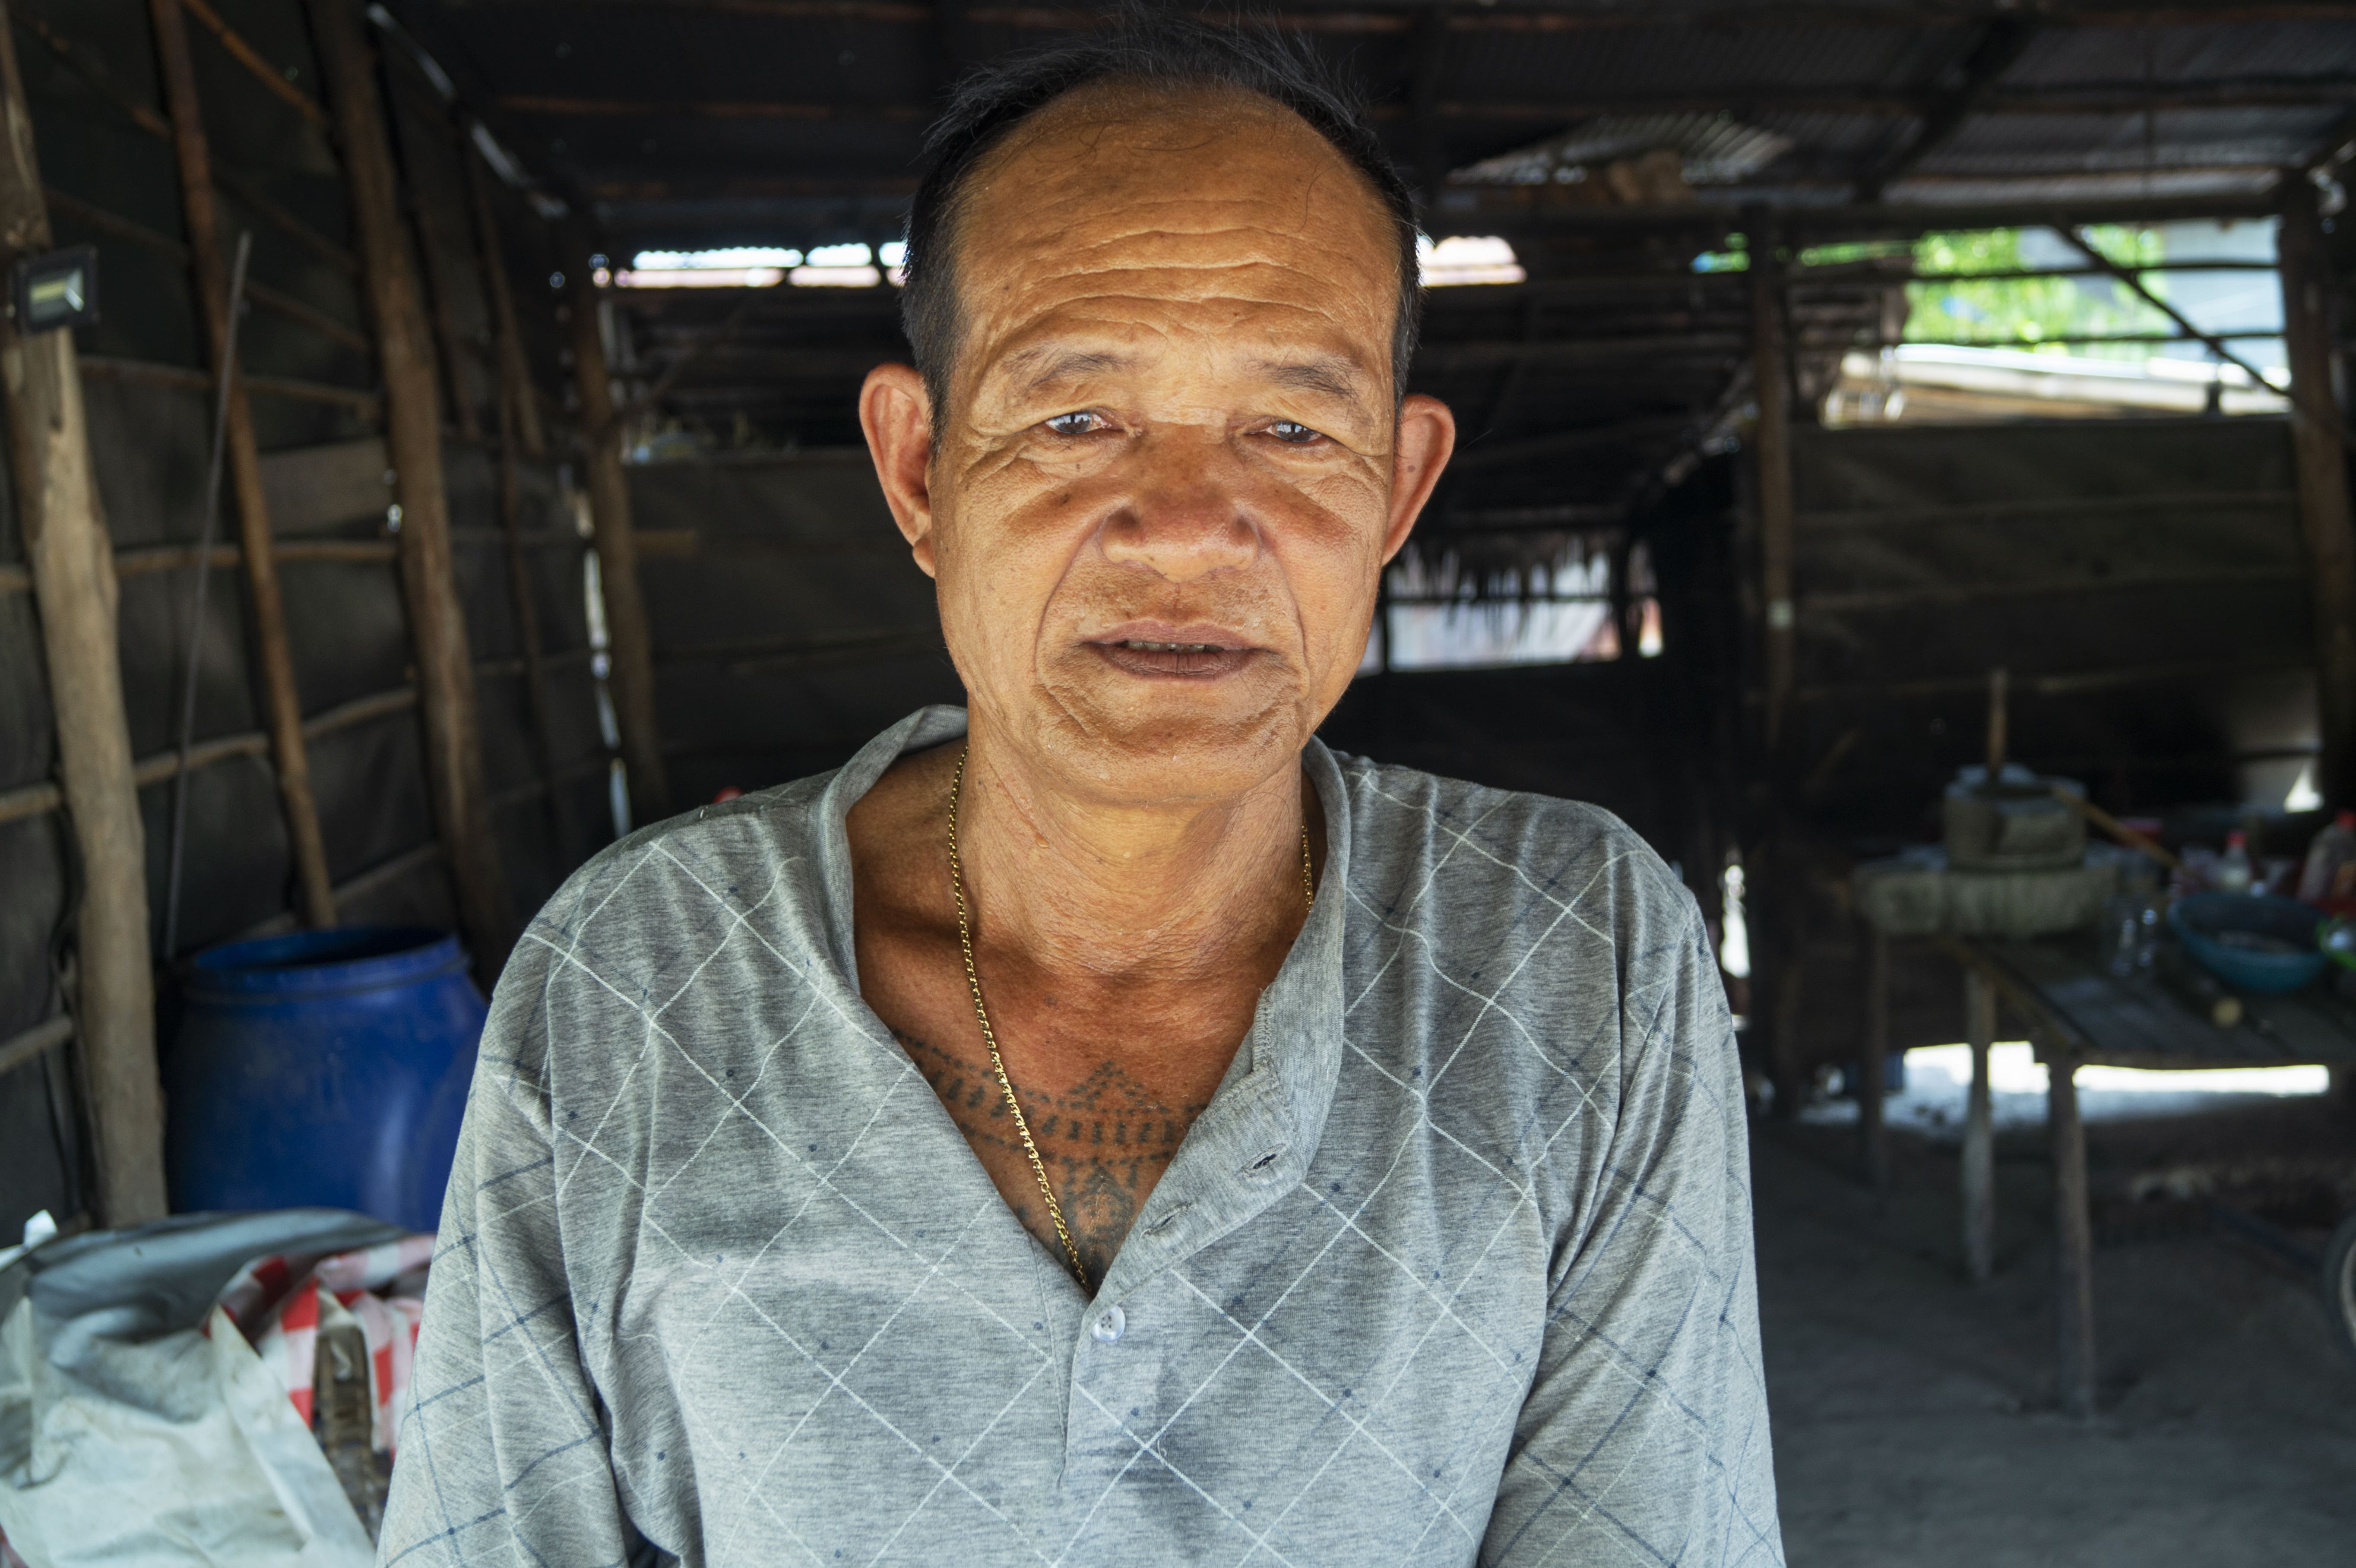 Sarun Khoun, Paris's grandfather, remembers in 1970 being exposed to powder that caused his eyes to burn. “I have constant chest pain,” Khoun said, but added that his Agent Orange-related suffering is incomparable to the torture he suffered under the Khmer Rouge. 